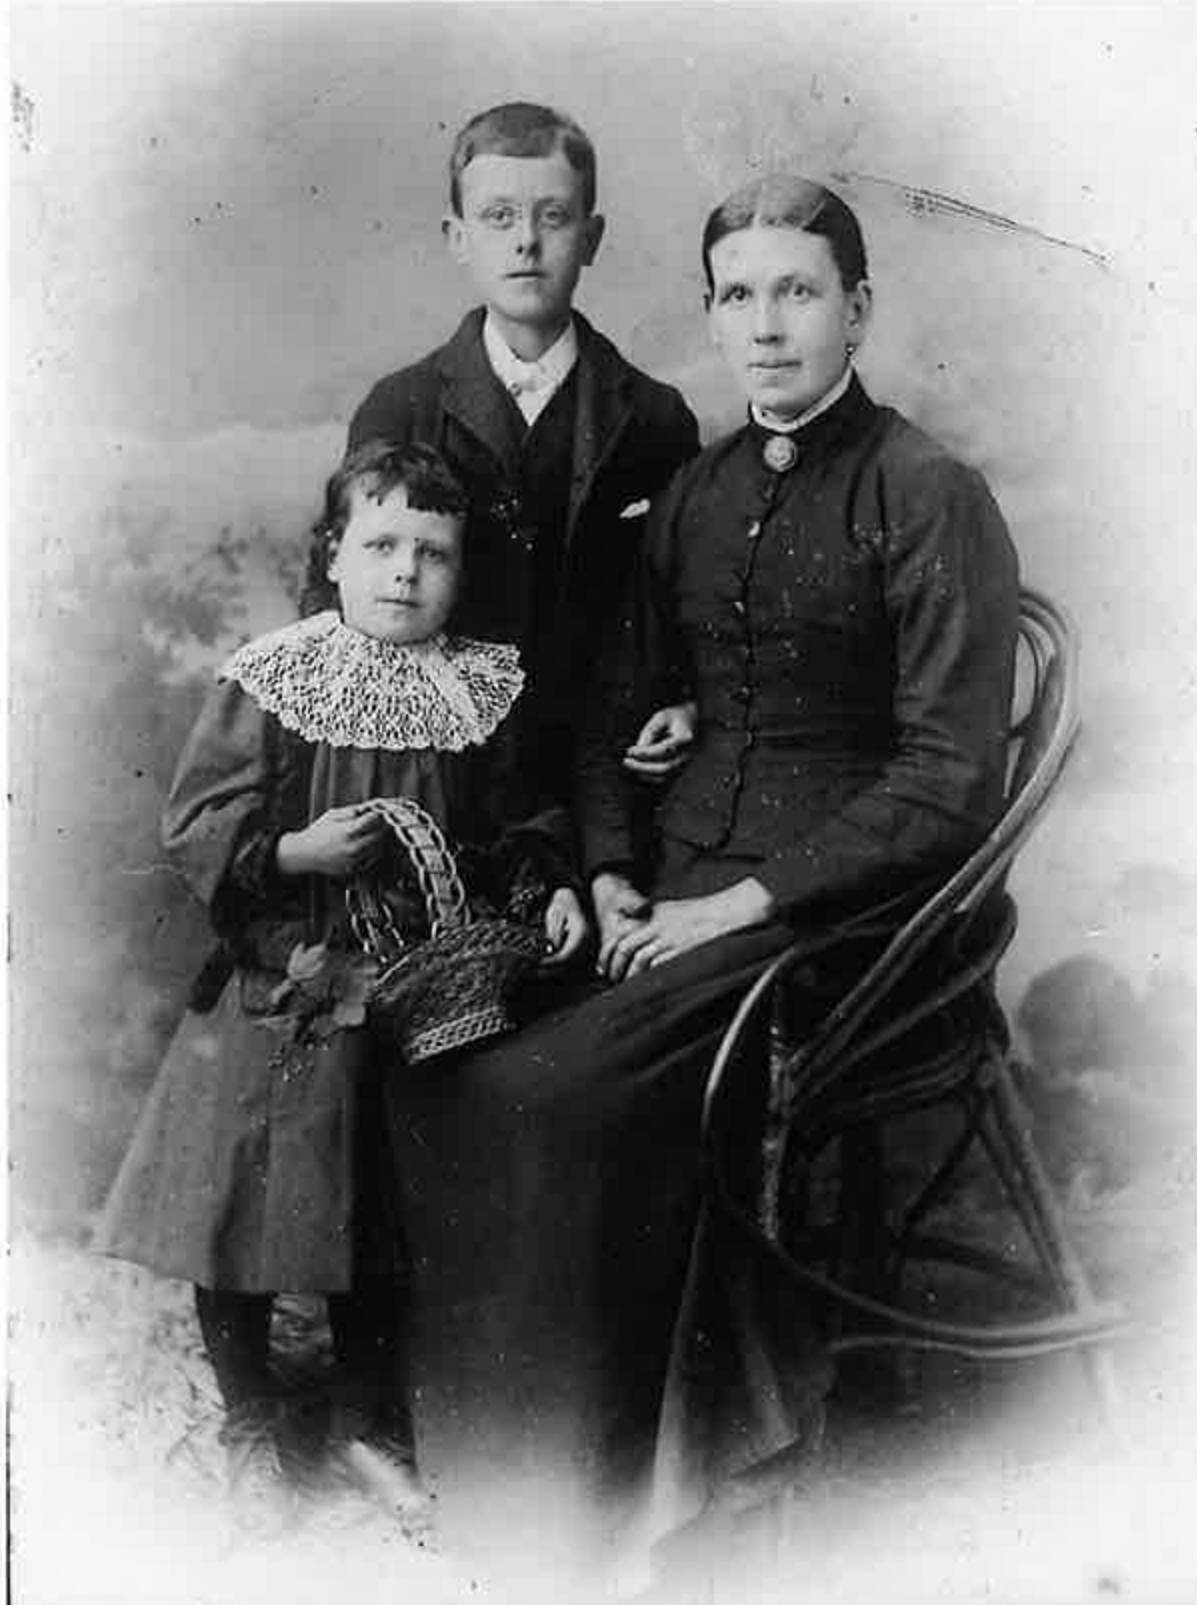 "Maggie Millar McCover Hannah (cropped)"
Maggie Millar McCover Hannah (1848-1925) and her children Archi Jnr and Margaret.
Provided by Margaret Mitchell
Linked To: <a href=